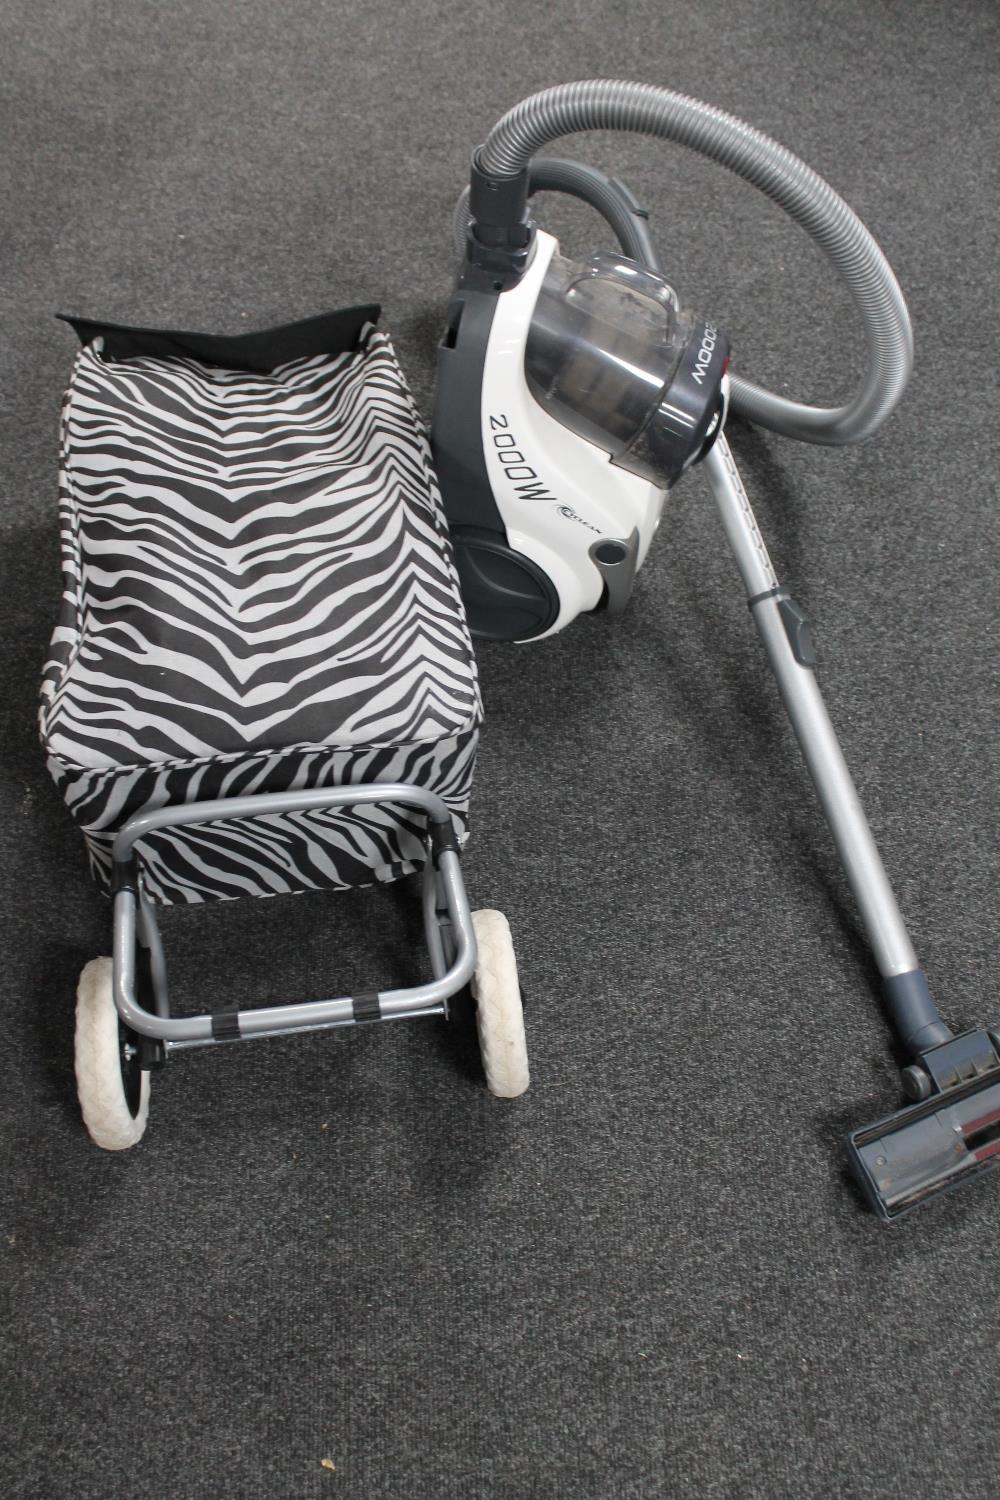 A Hoover cylinder vacuum together with an Sabichi shopping trolley